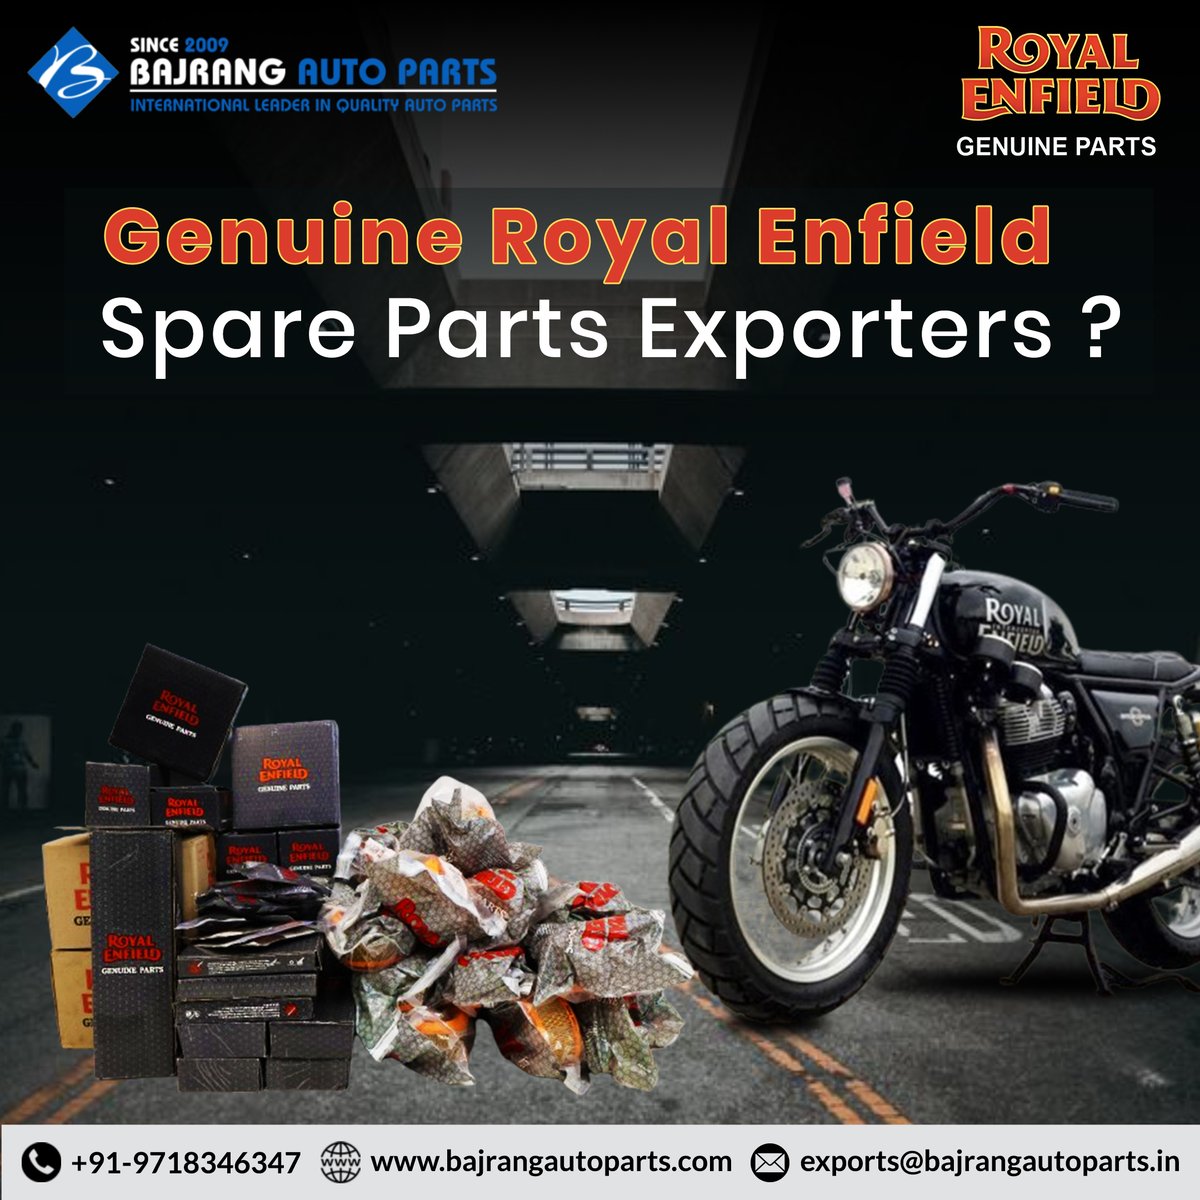 Don't compromise on authenticity. Choose genuine Royal Enfield spare parts for unmatched performance and peace of mind. 
#RoyalEnfield #GenuineParts #QualityMatters #BikeLife #AuthenticCraftsmanship #RoadWarrior #ExploreMore  #GearUp